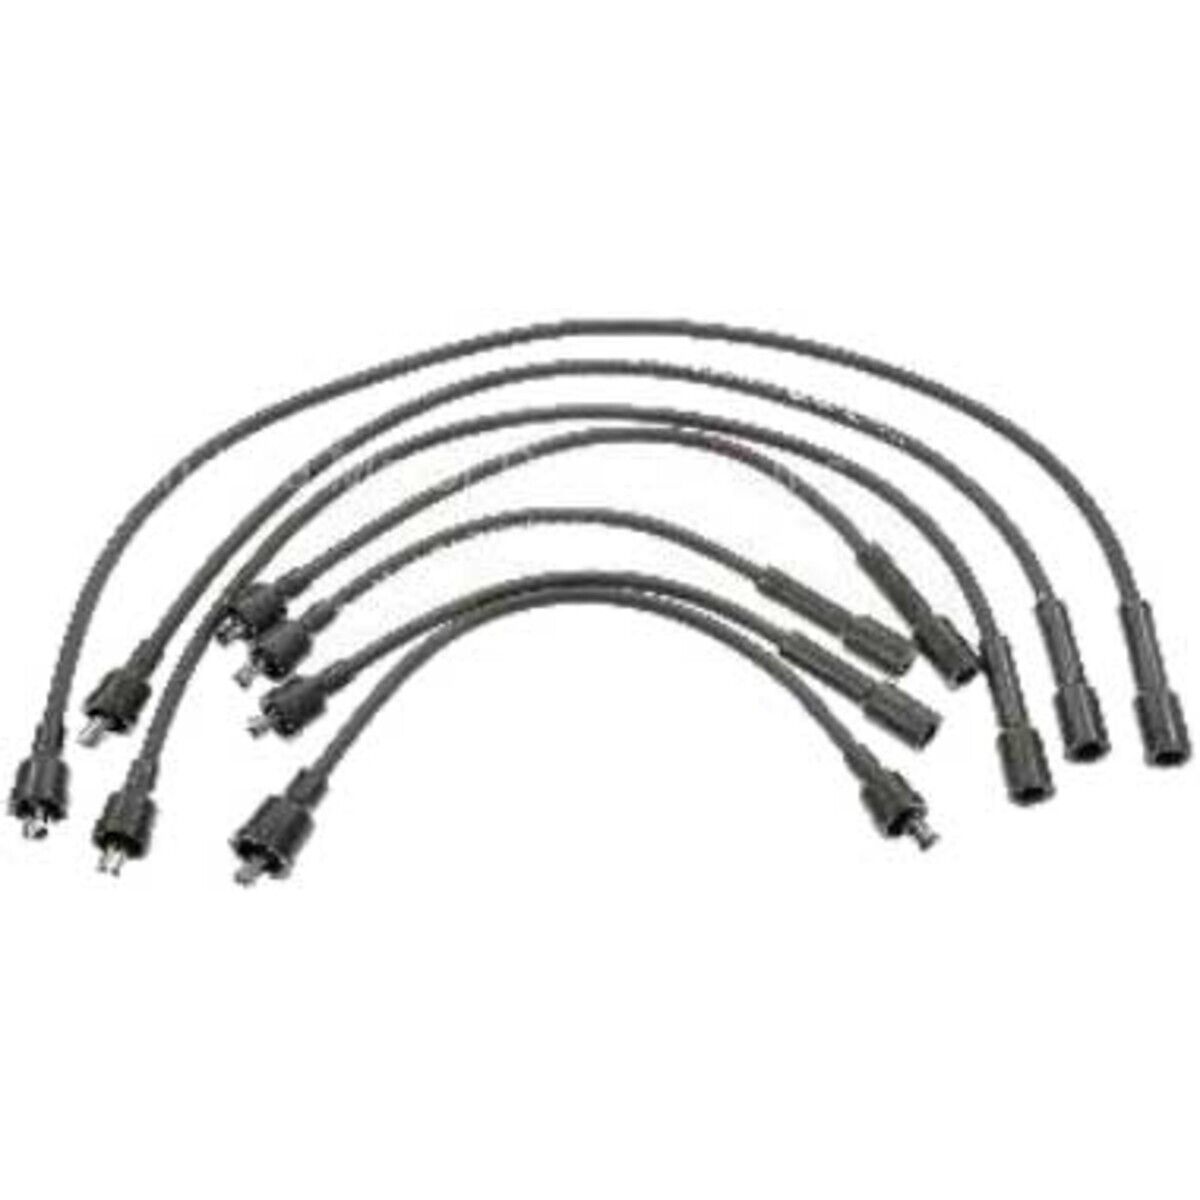 27619 Spark Plug Wires Set of 6 for Chevy Olds Suburban Express Van Malibu F-250